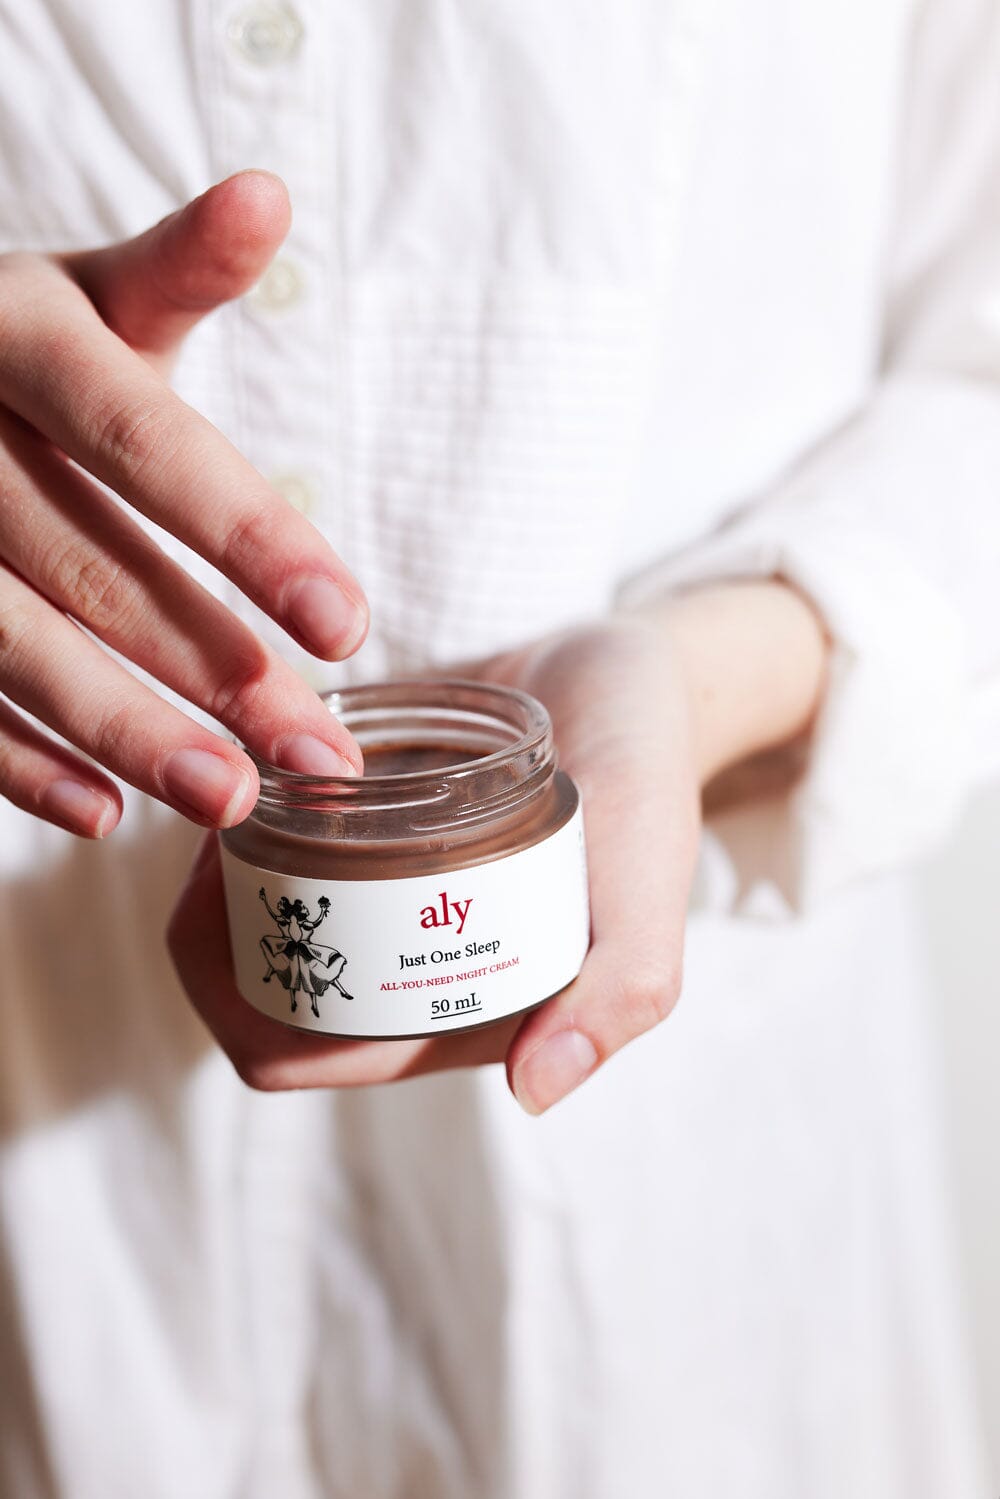 Just One Sleep Organic Over-Night Treatment With Dragon's Blood and Arnica CREAM LOVE ALY'S 